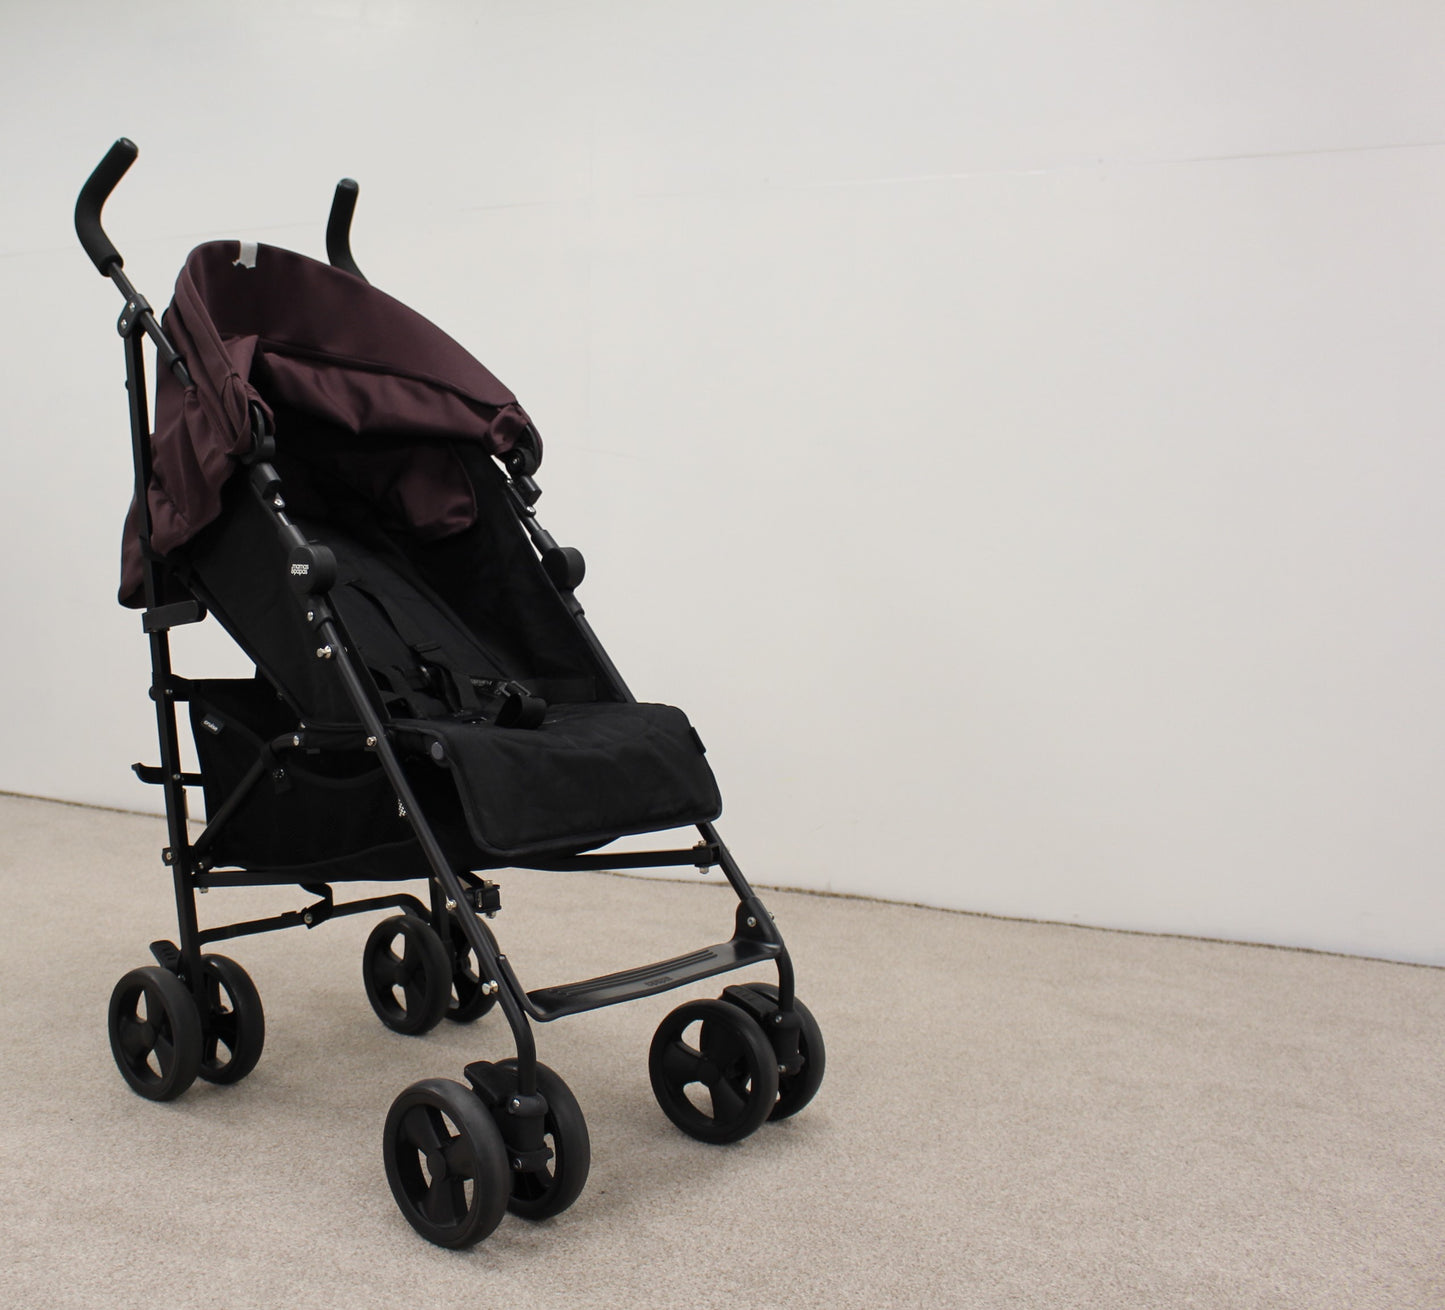 Stroller by Mamas and Papas